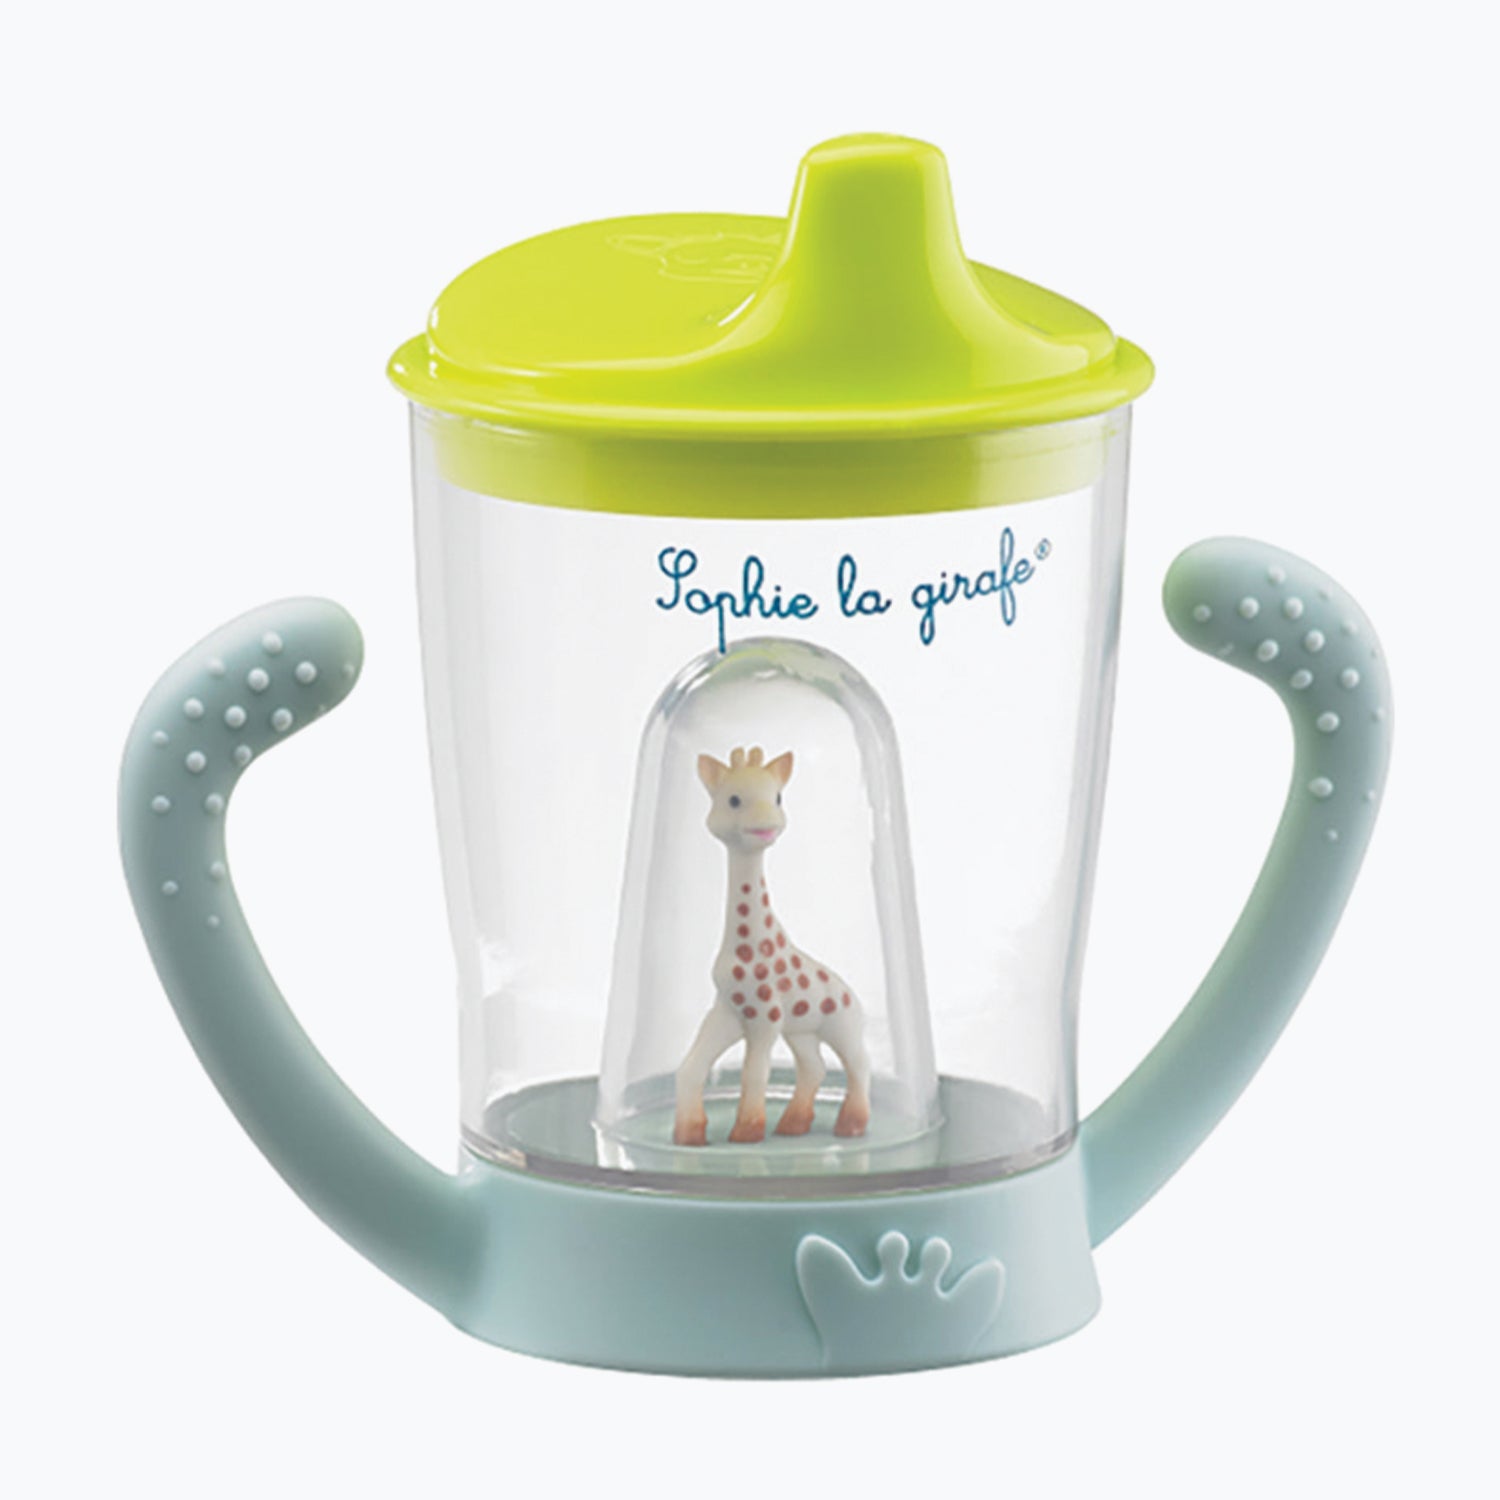 An image of No Spill Cup - Baby Cup - Non-spill cup | Sophie la Girafe